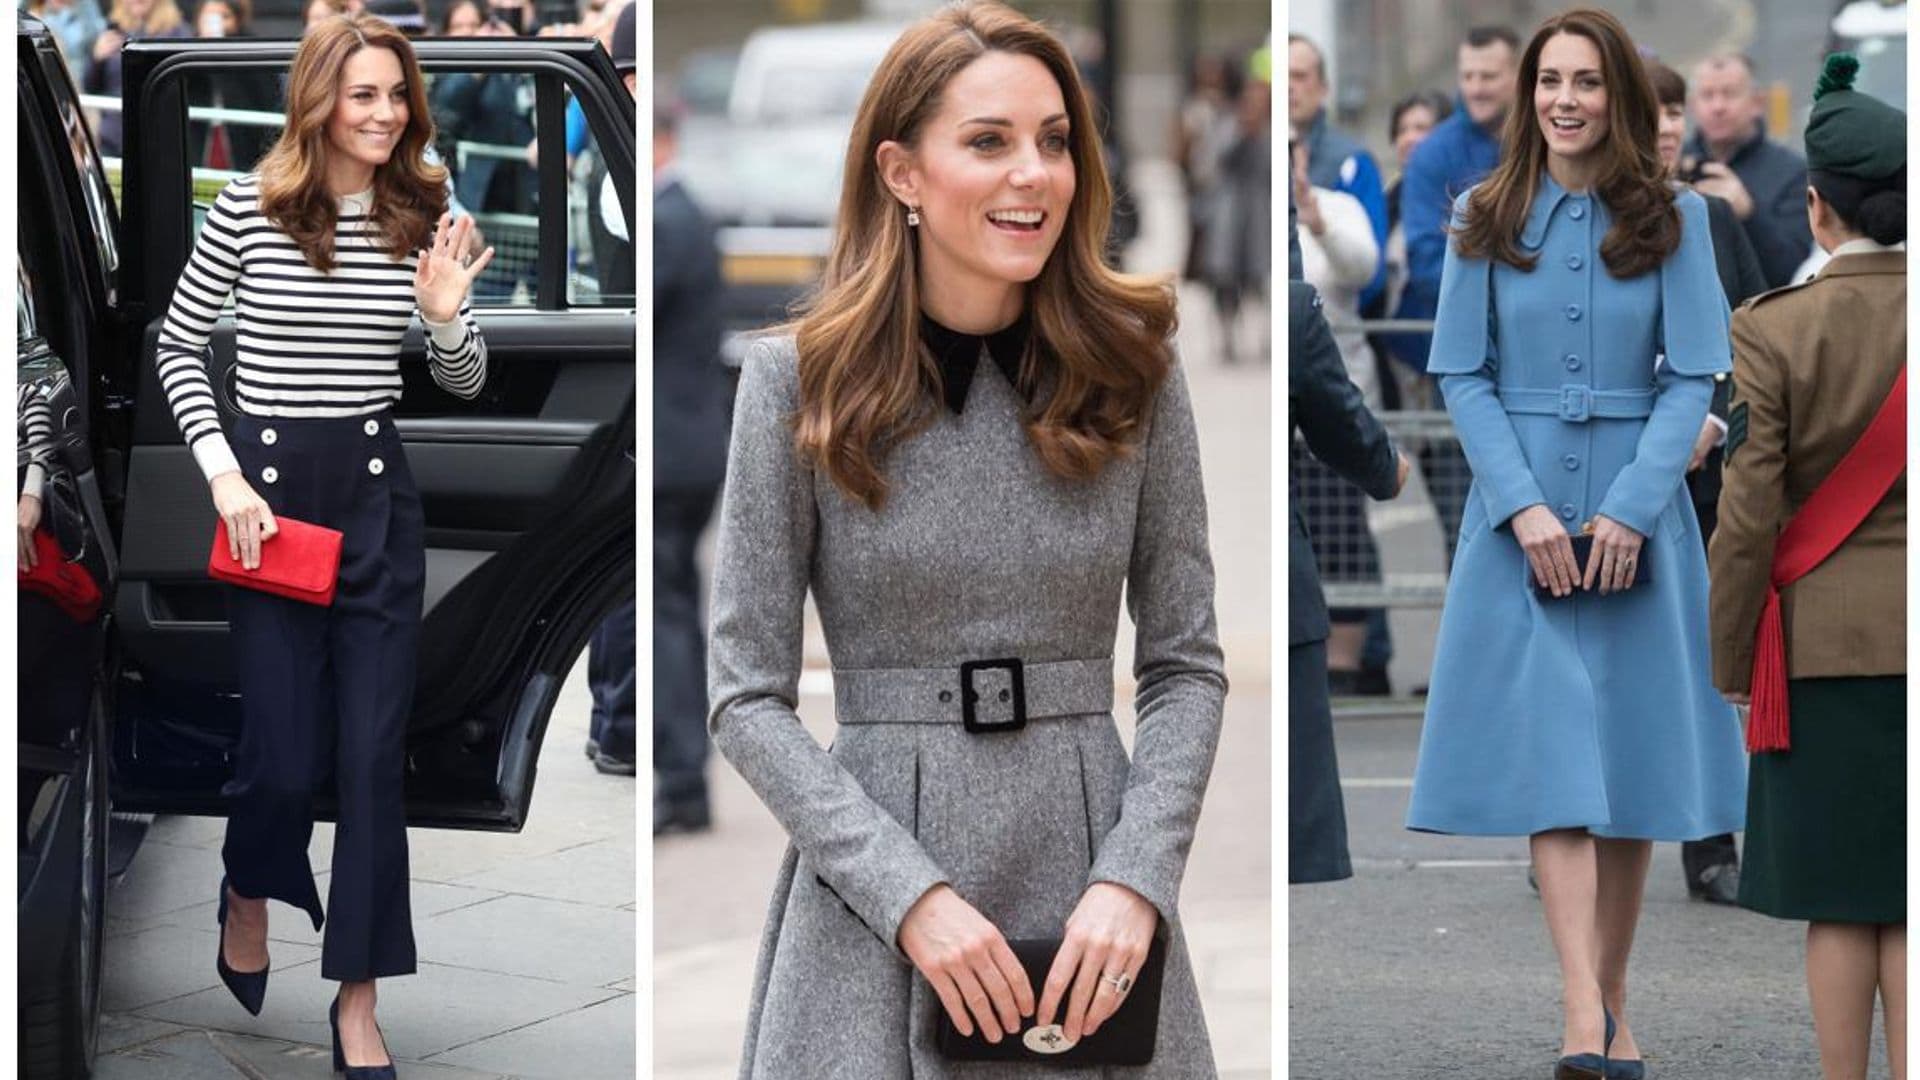 Kate Middleton with the pieces she includes most in her outfits